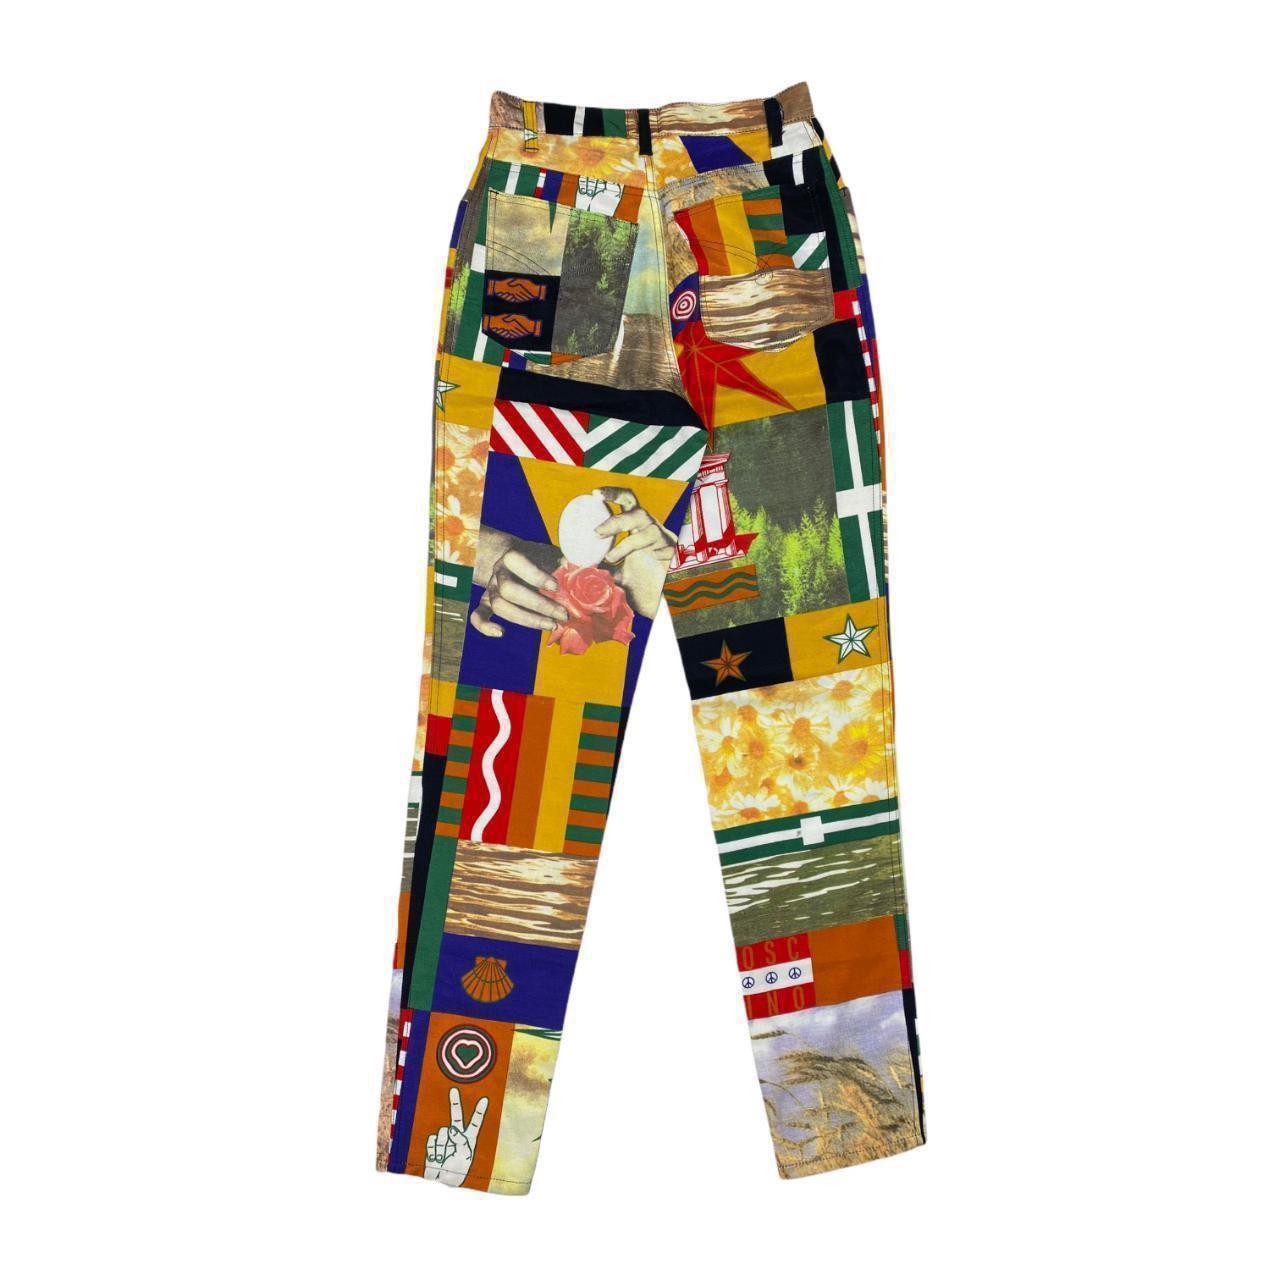 Moschino Sun Printed Jeans

Very Rare

Sun Peace and Love 90's Trousers

90s Nostalgia Design.

High Rise

CONDITION: This item is a vintage/pre-worn piece so some signs of natural wear and age are to be expected. However in good general